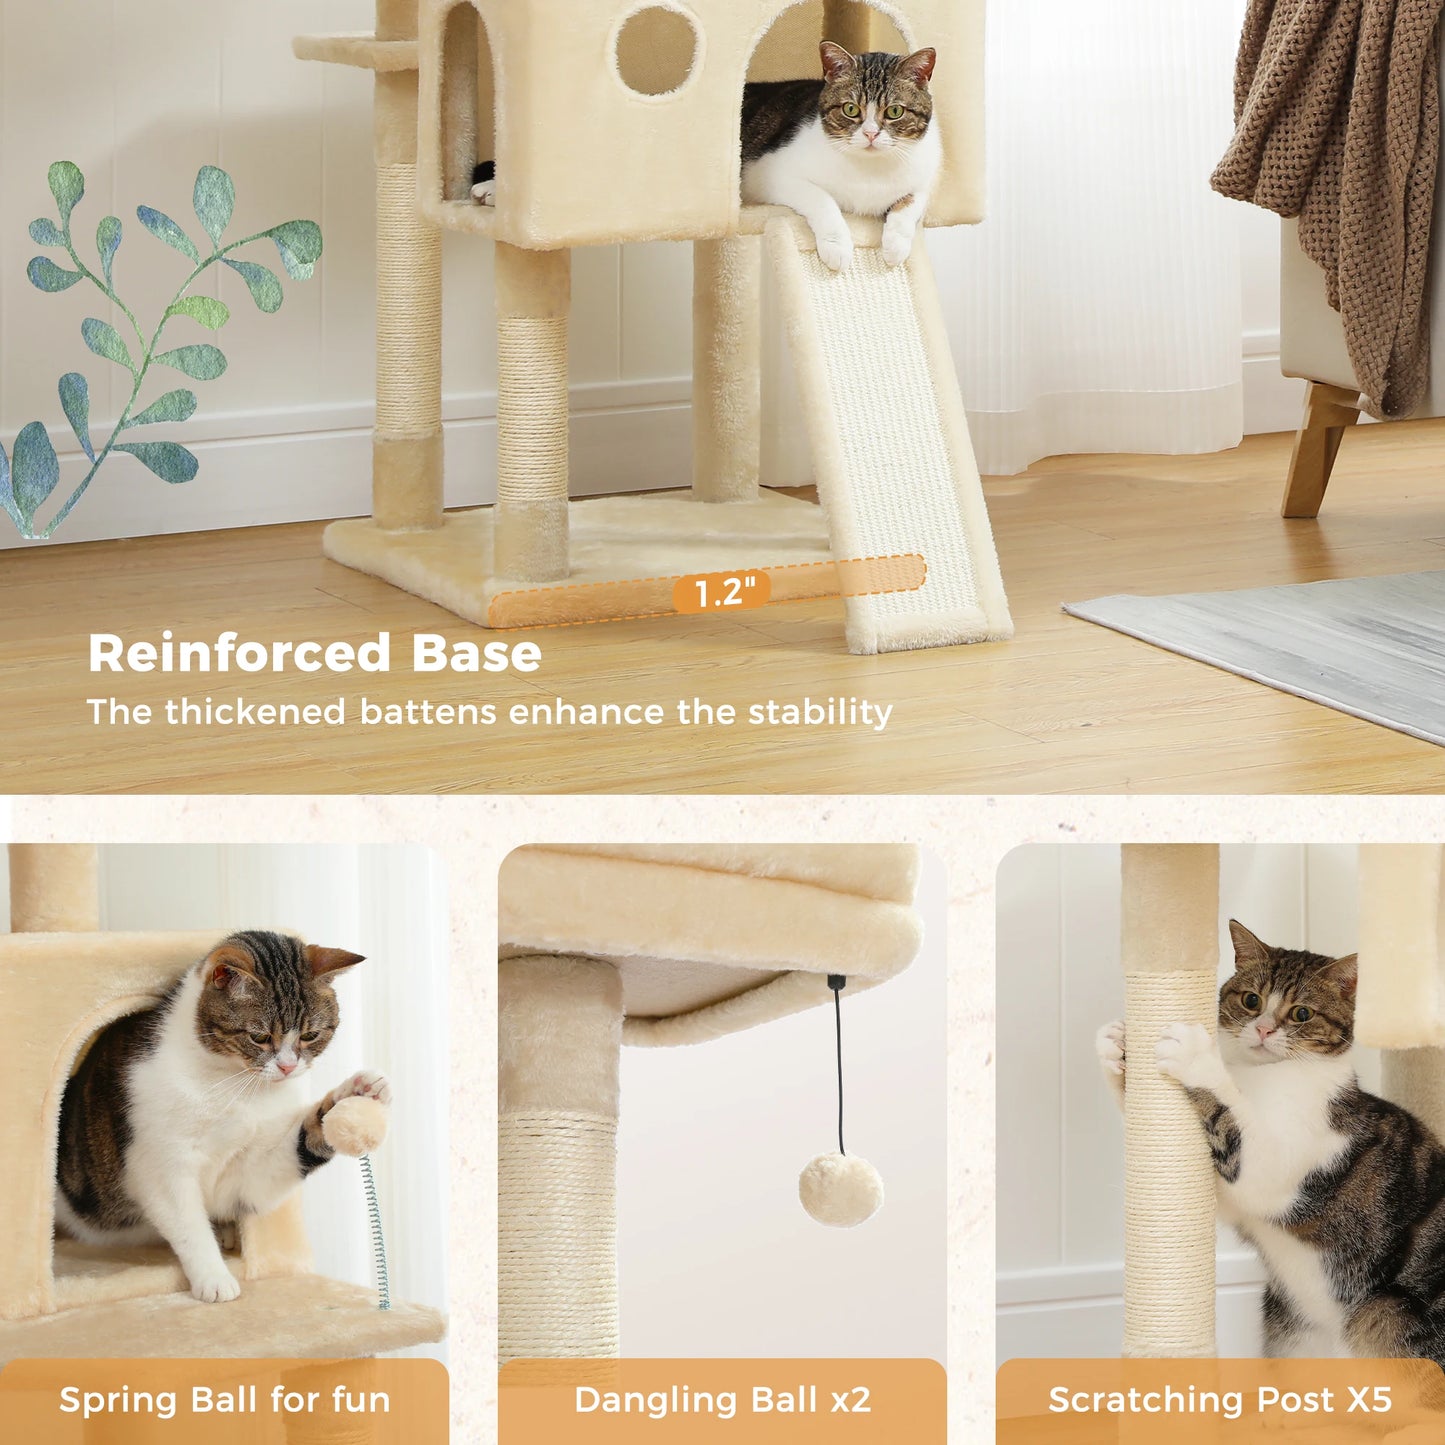 162cm Deluxe Multi-Level Cat Tree with Condo and Scratching Posts